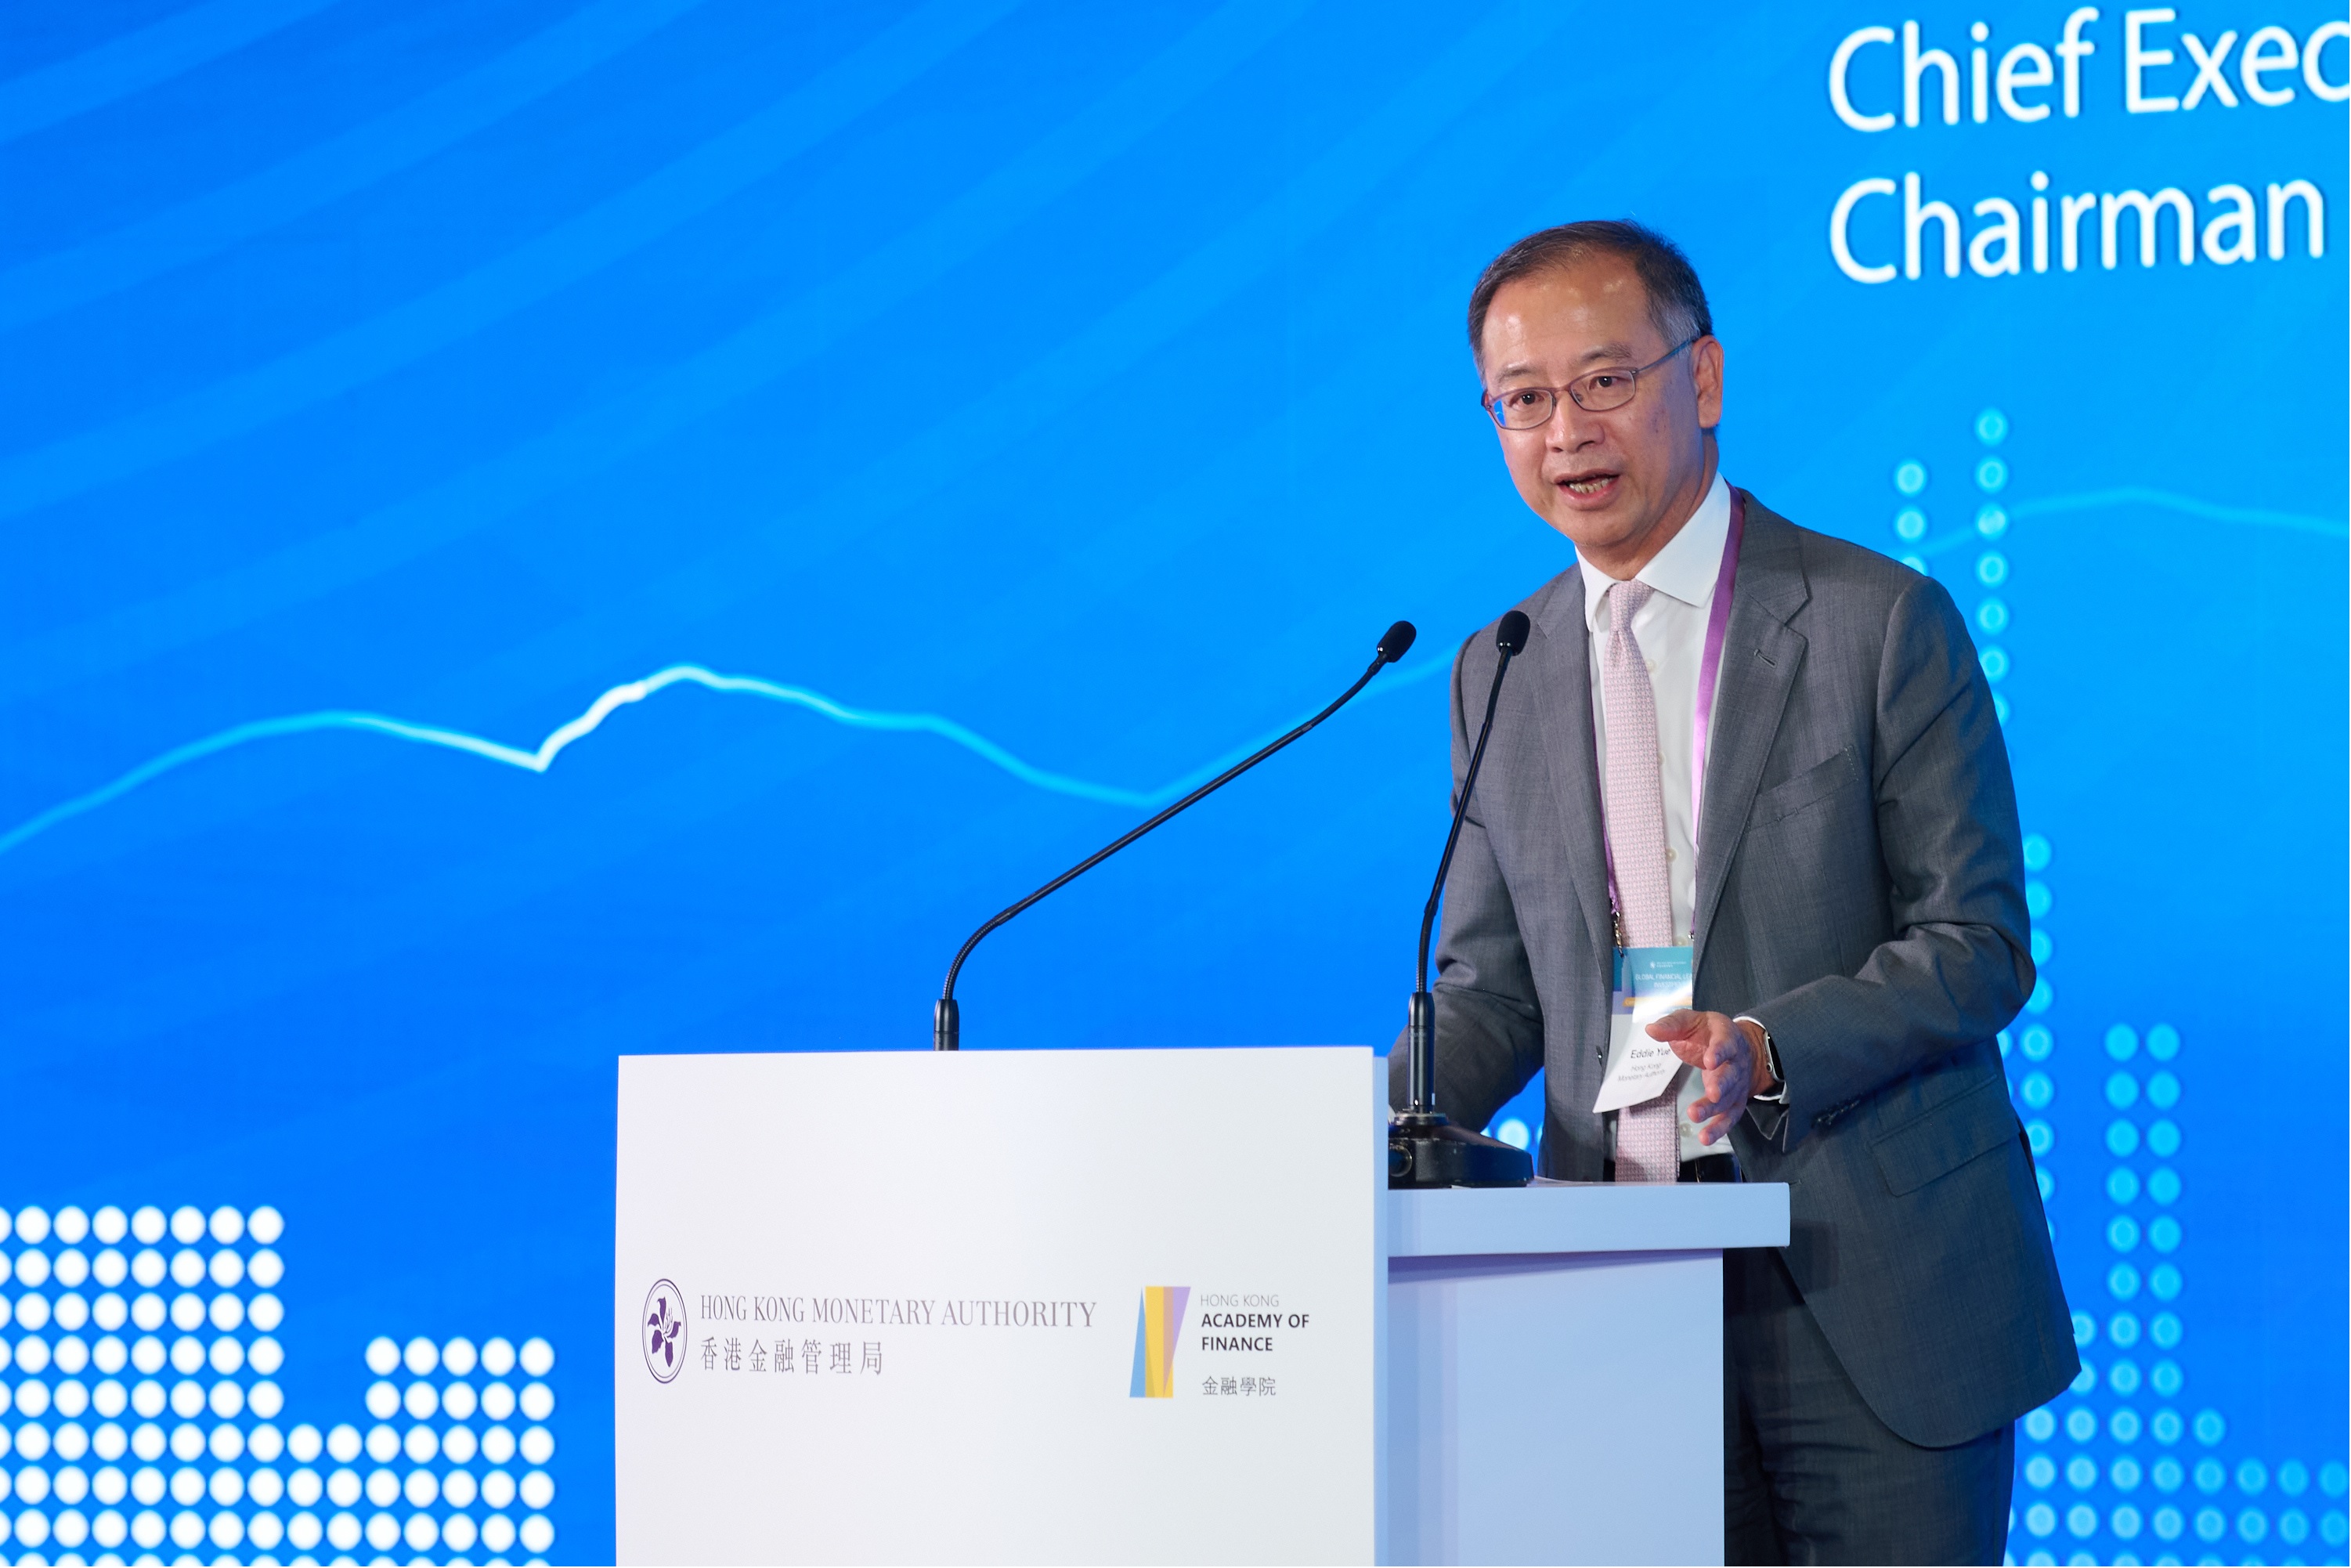 Mr Eddie Yue, Chief Executive of the Hong Kong Monetary Authority, delivers closing remarks at the “Conversations with Global Investors” seminar of the Global Financial Leaders’ Investment Summit on 3 November.